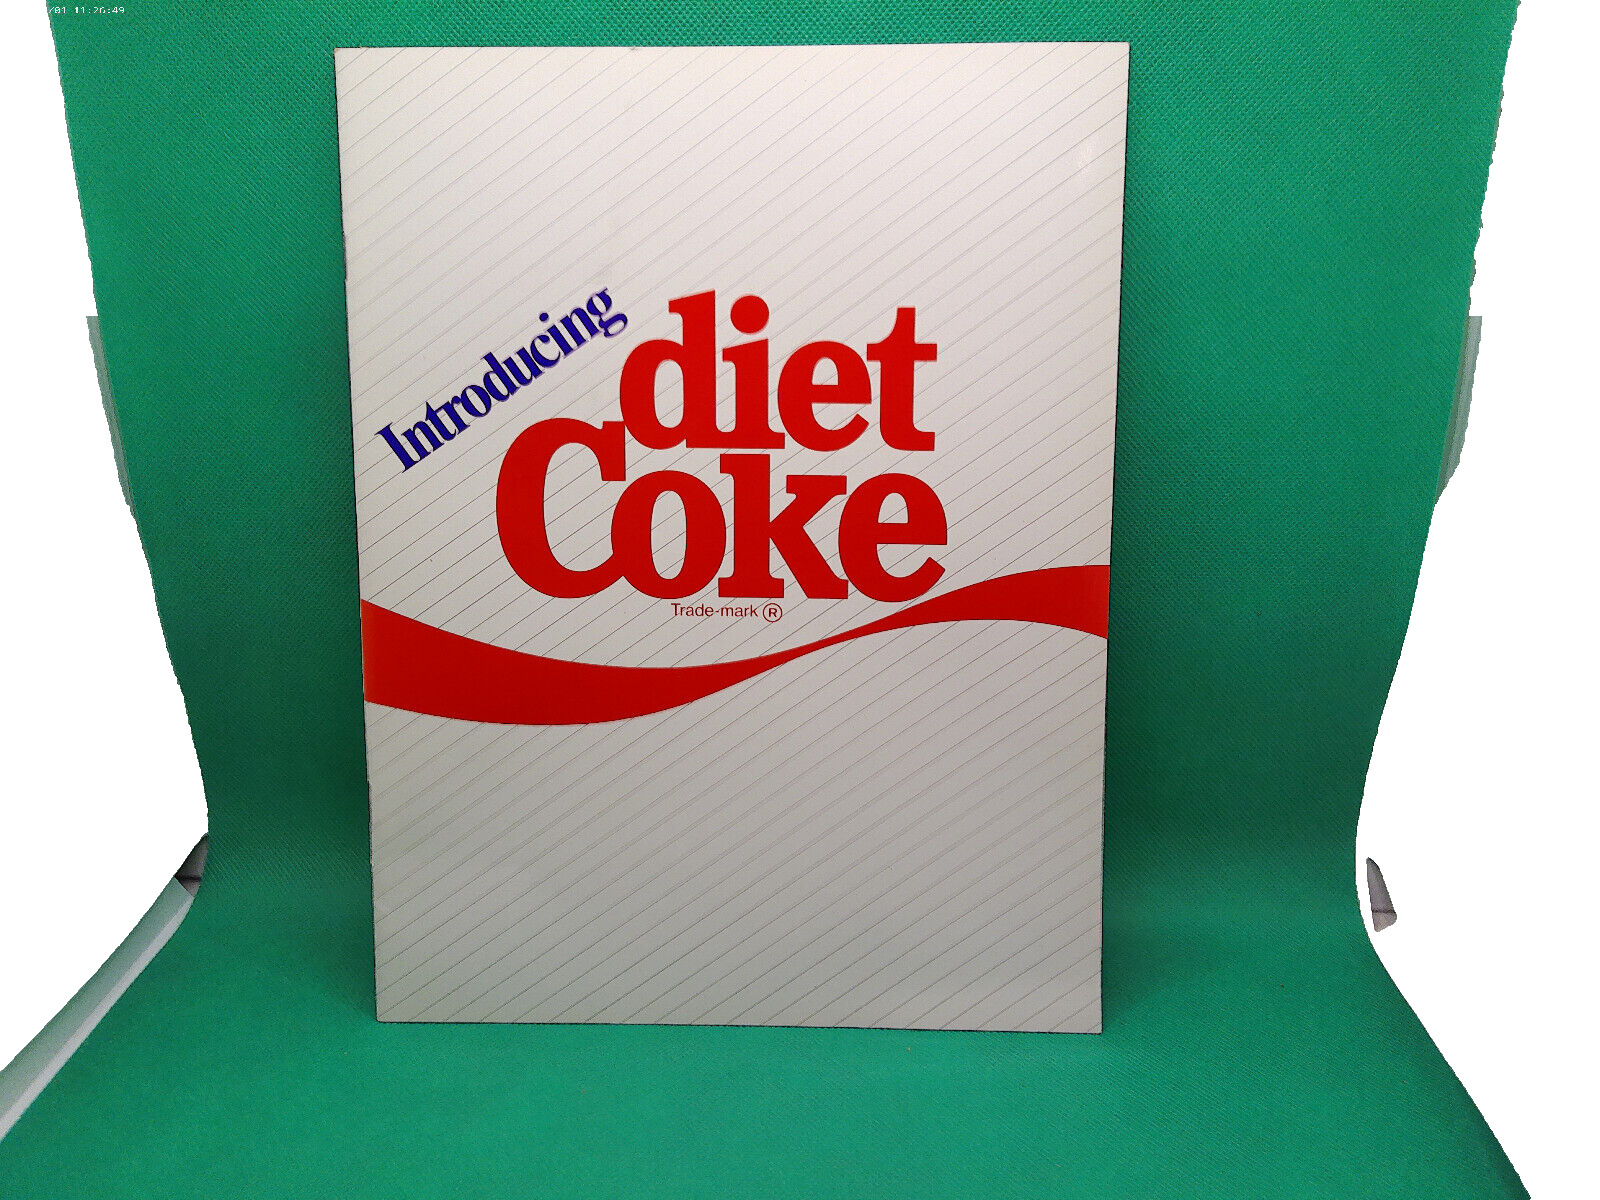 Introducing Diet Coke brochure for vendors 1980s era 10 pages in all promo